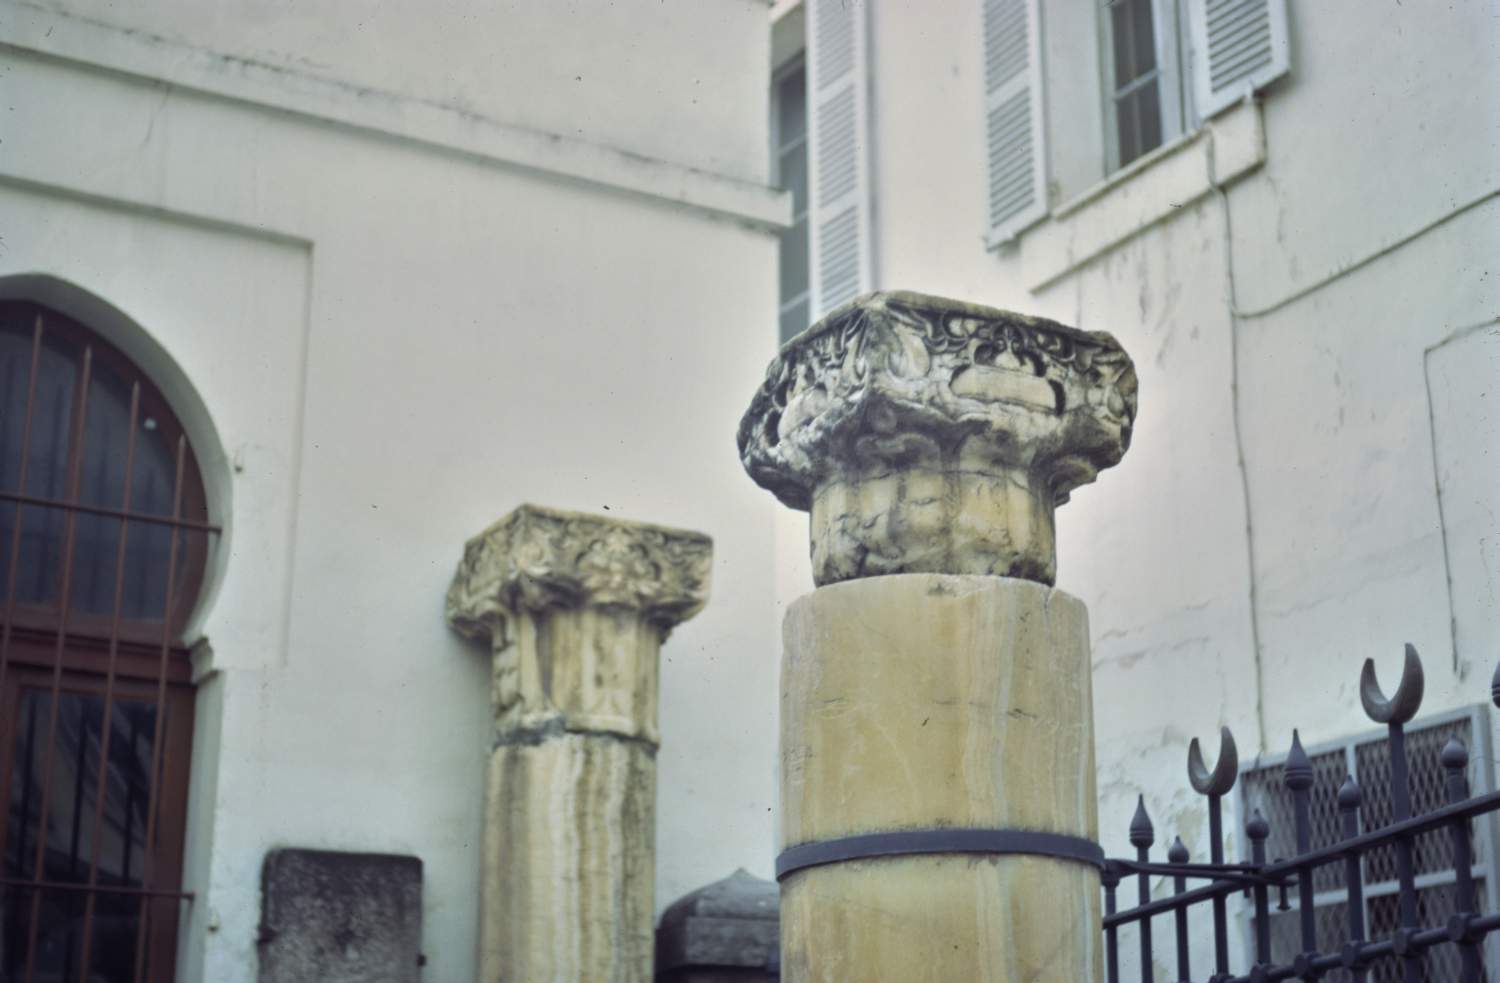 View of displayed capitals